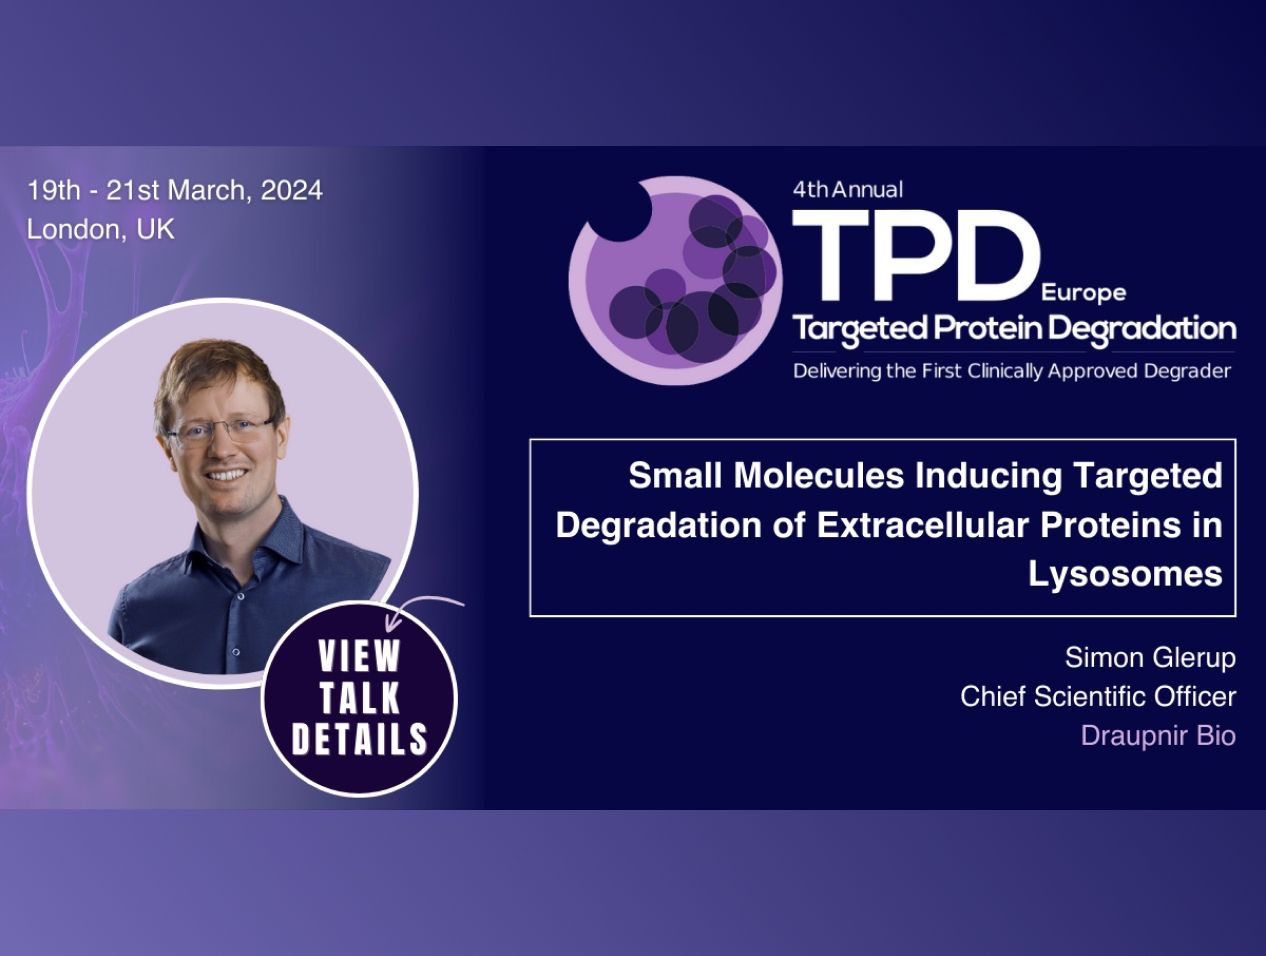 Our CSO Simon Glerup is invited speaker at the 4th Annual TPD Europe conference, presenting our platform for small molecule degraders of extracellular proteins